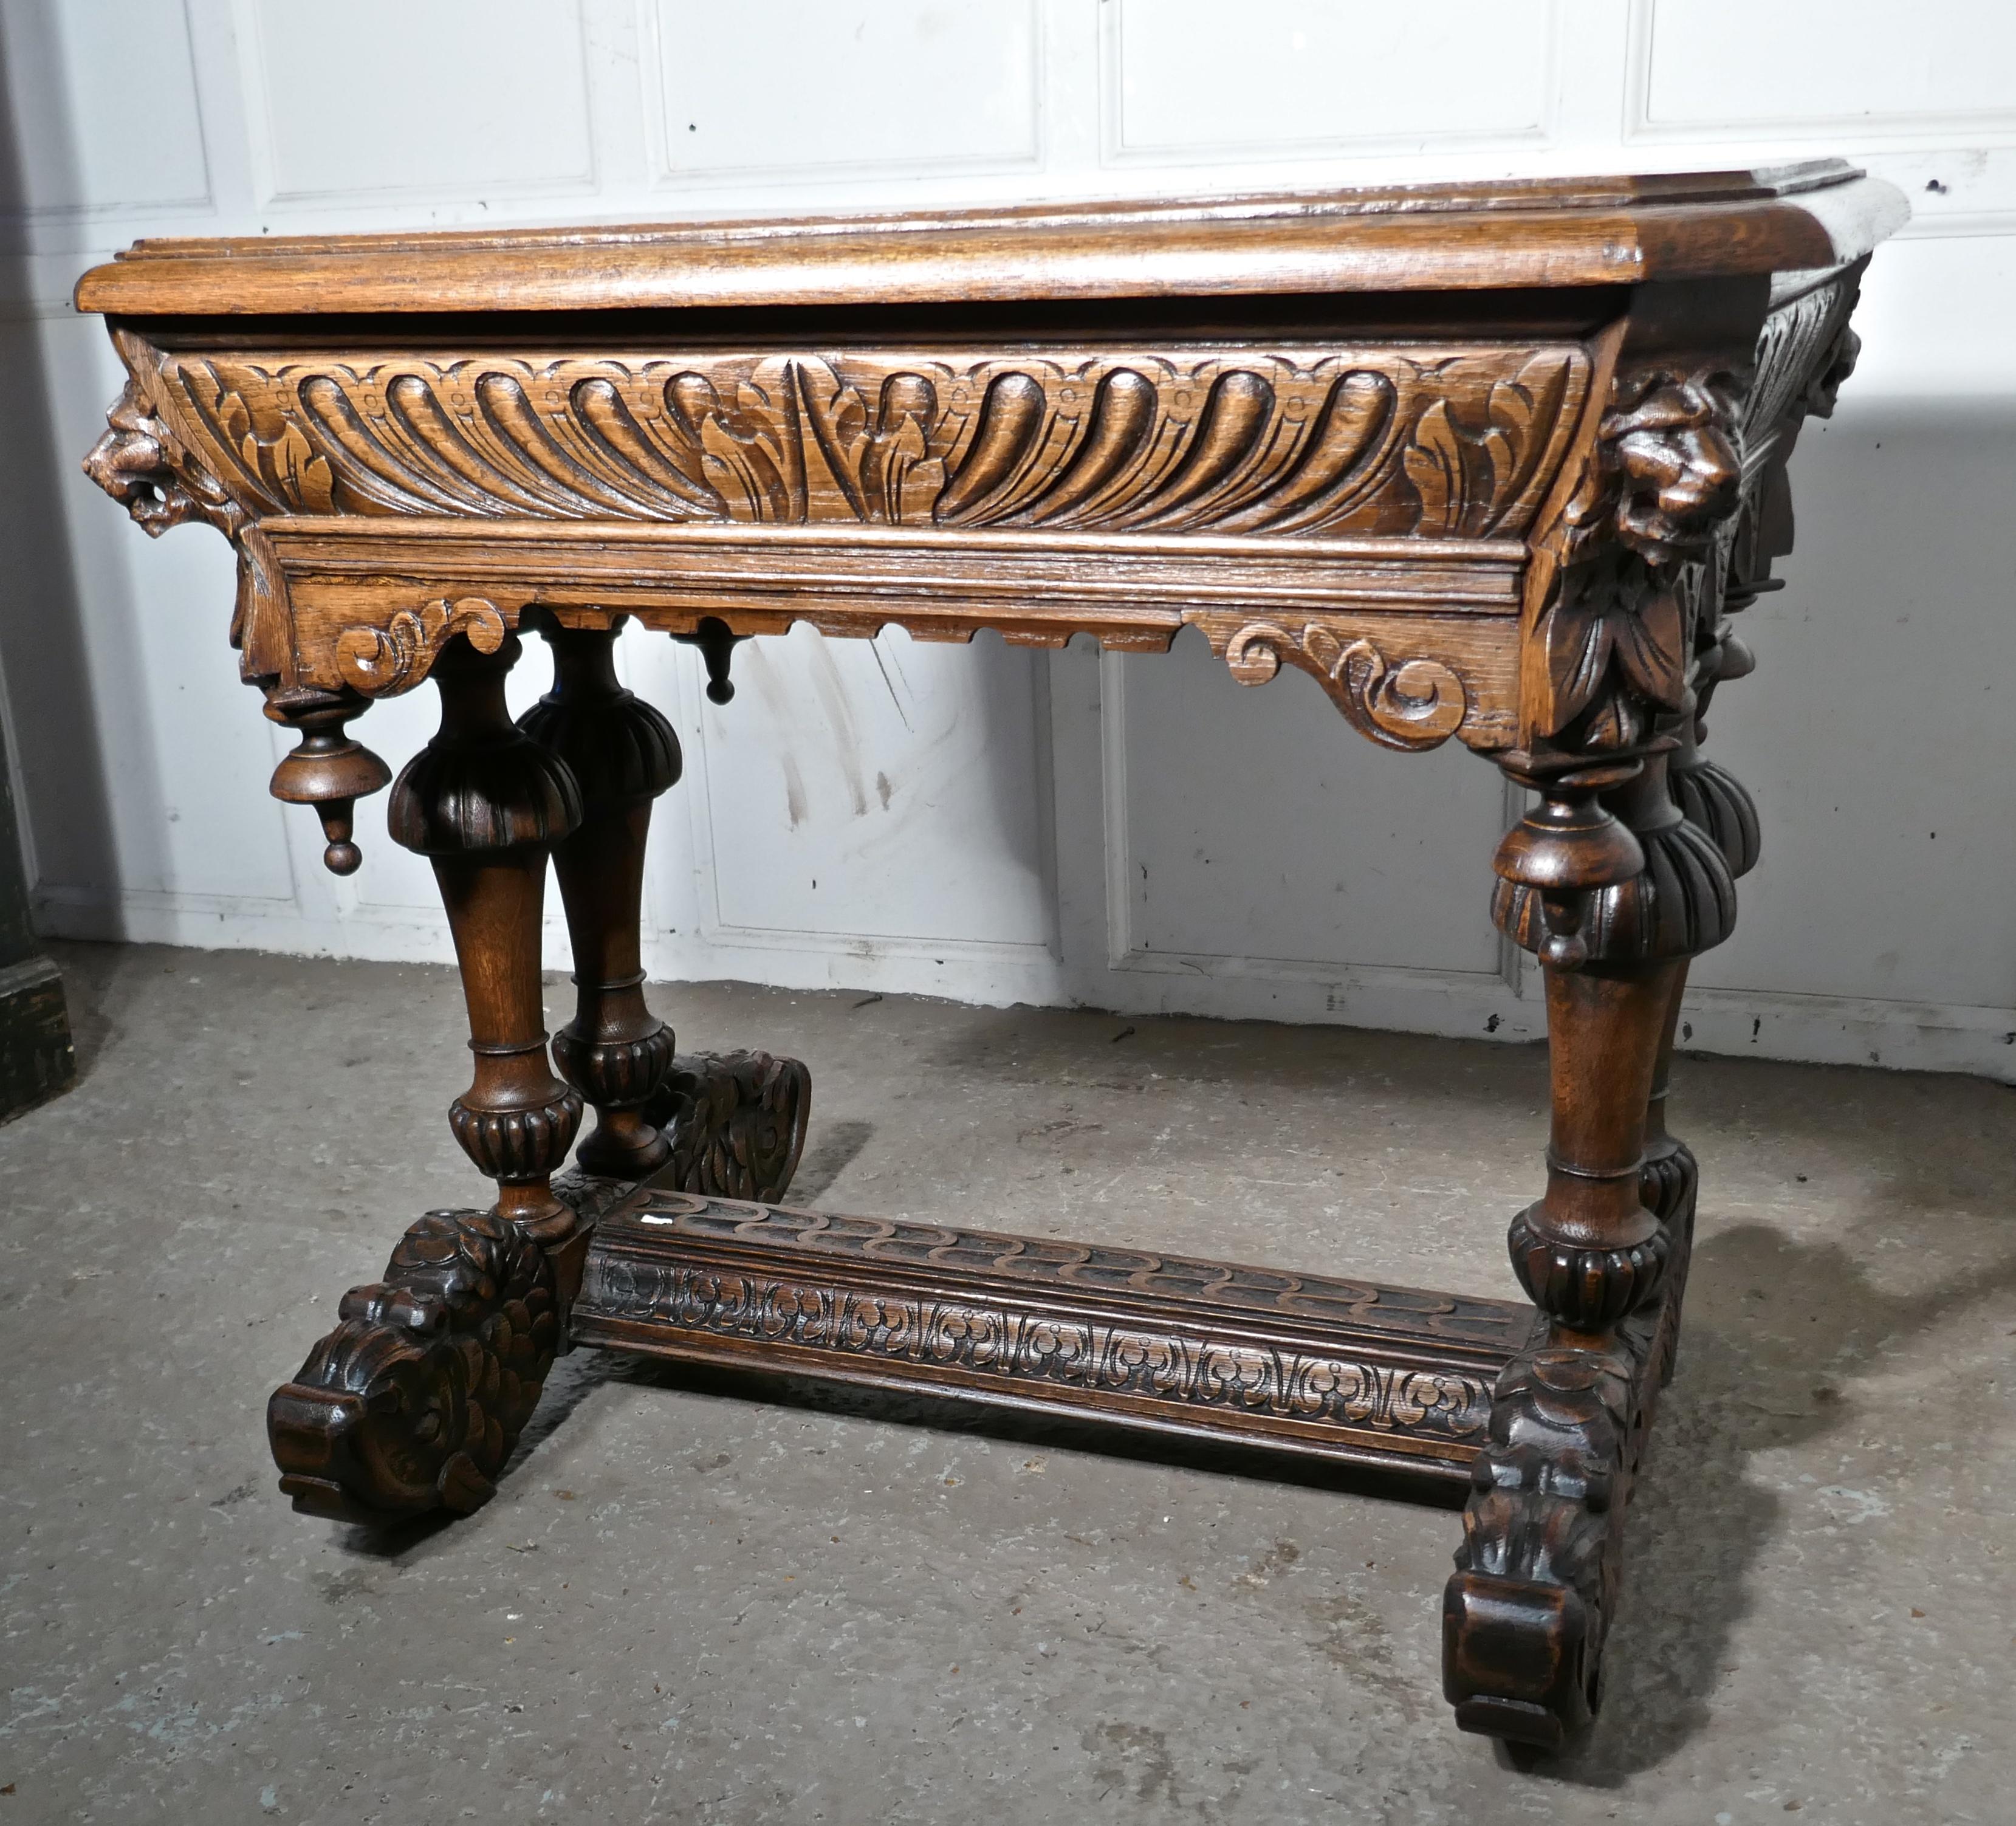 19th century Green Man carved golden oak hall or centre table
 
This is an intricately and very attractive piece, of Gothic carved oak furniture. The quality of this one is superb, the carving is fine and very detailed and the oak has an